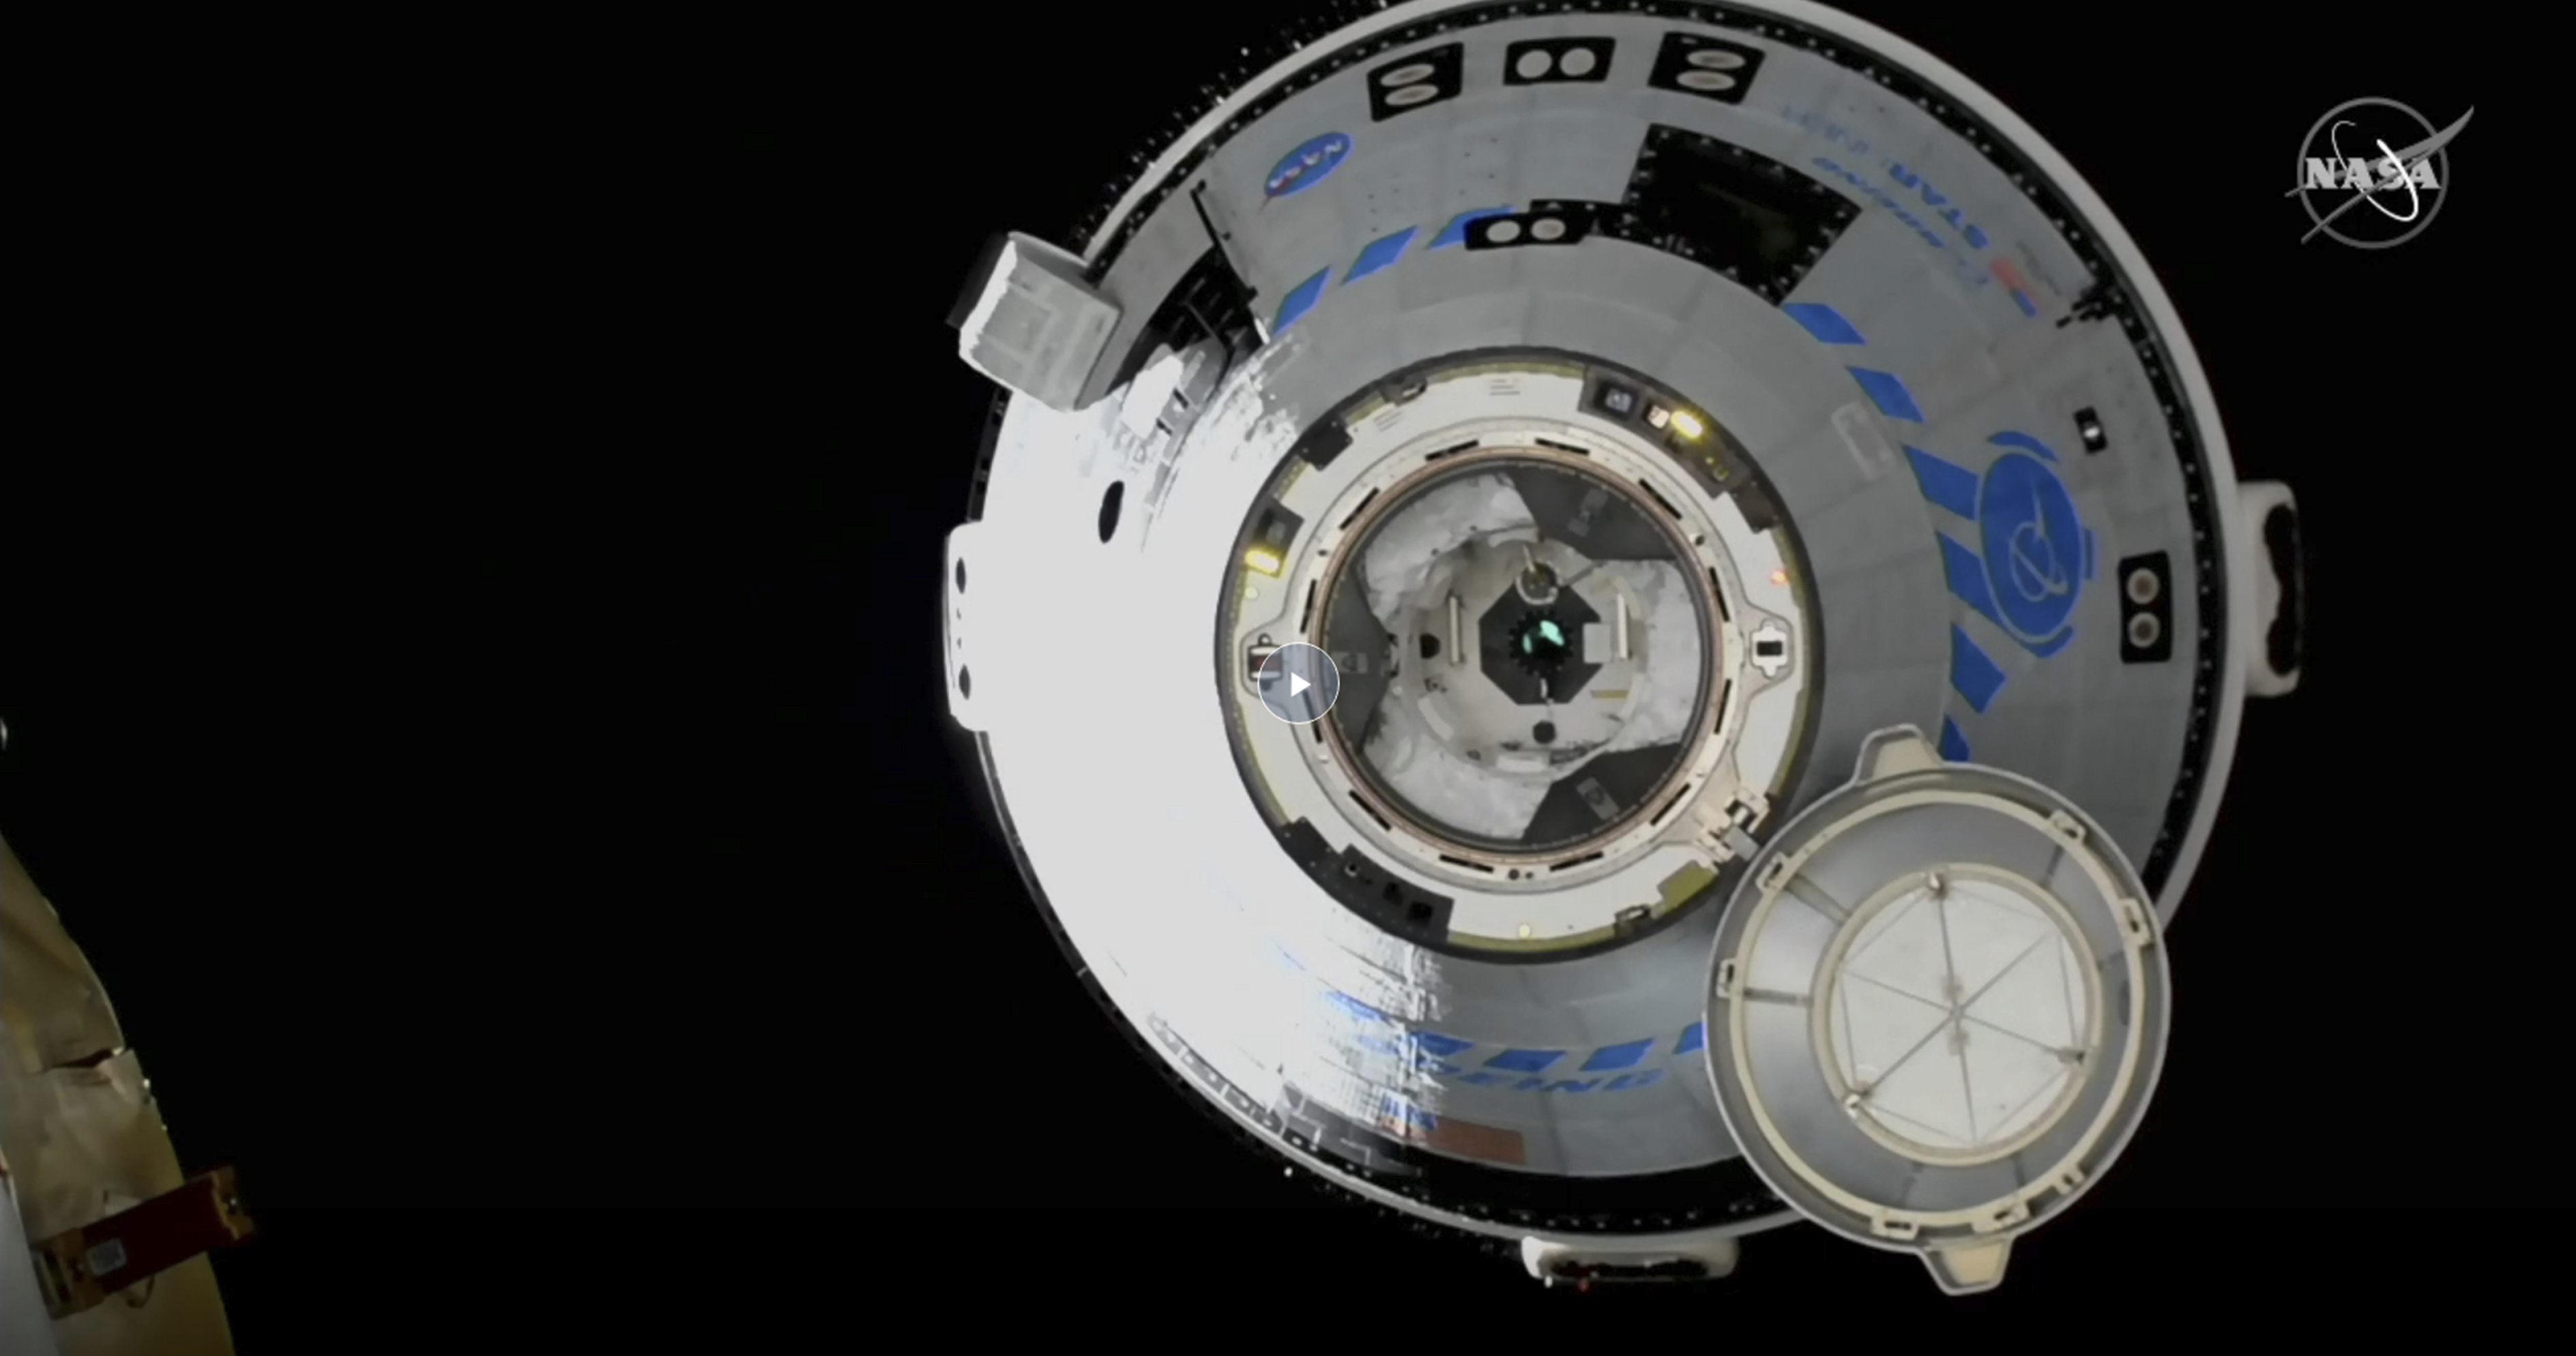 Boeing's Starliner could be ready for crewed flights by next March